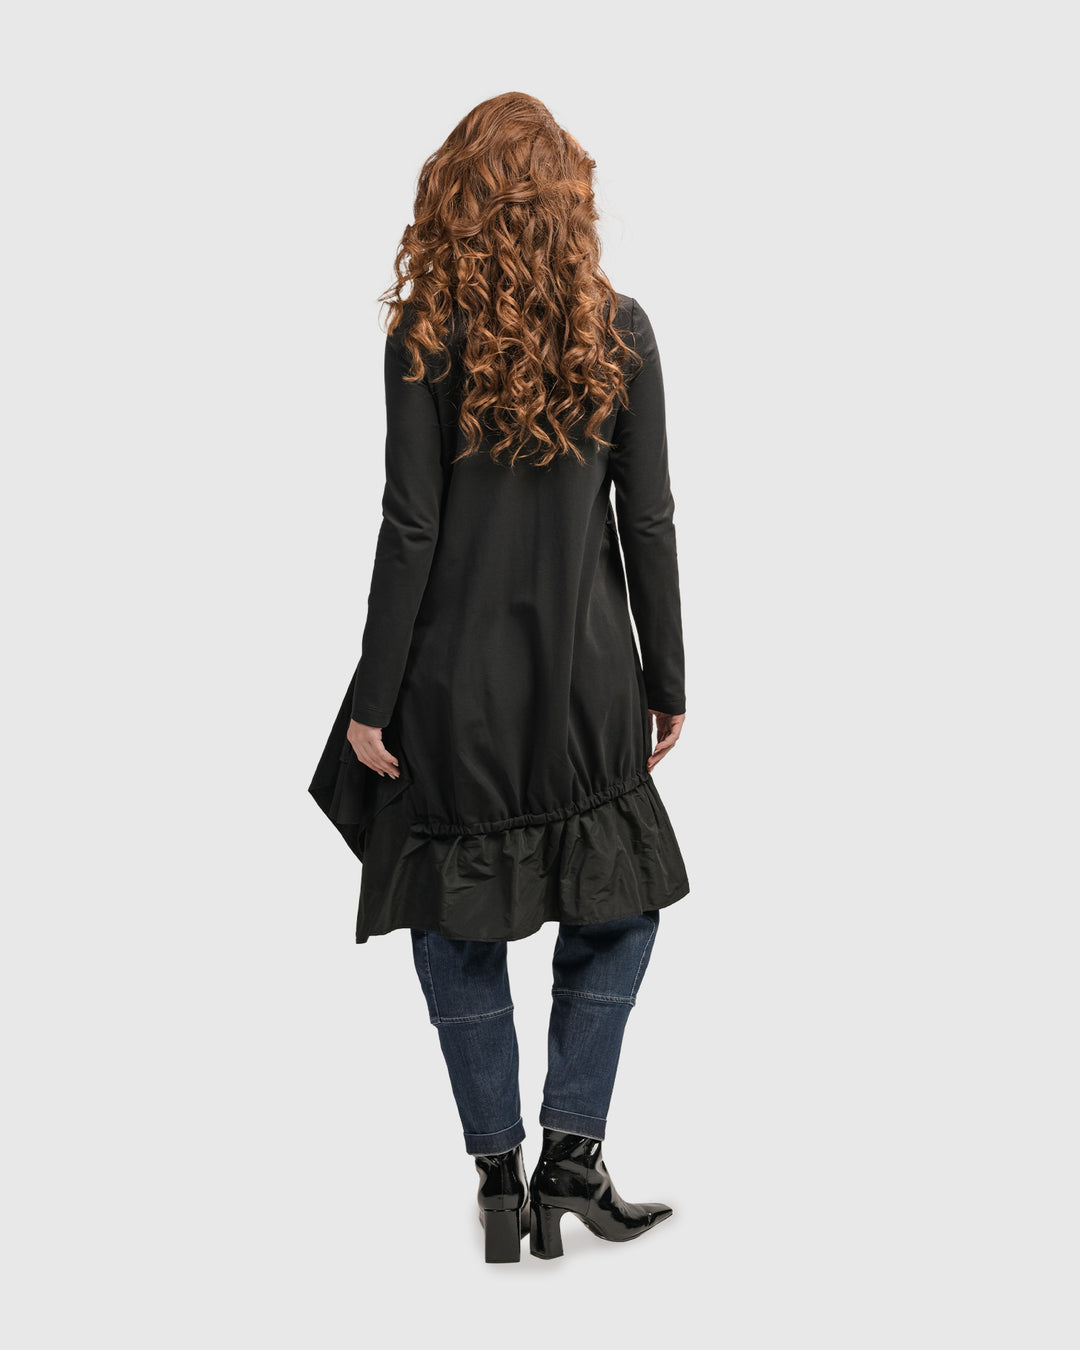 The woman in the back view is wearing an ALEMBIKA Urban New Wave Tunic Top in Black and jeans.